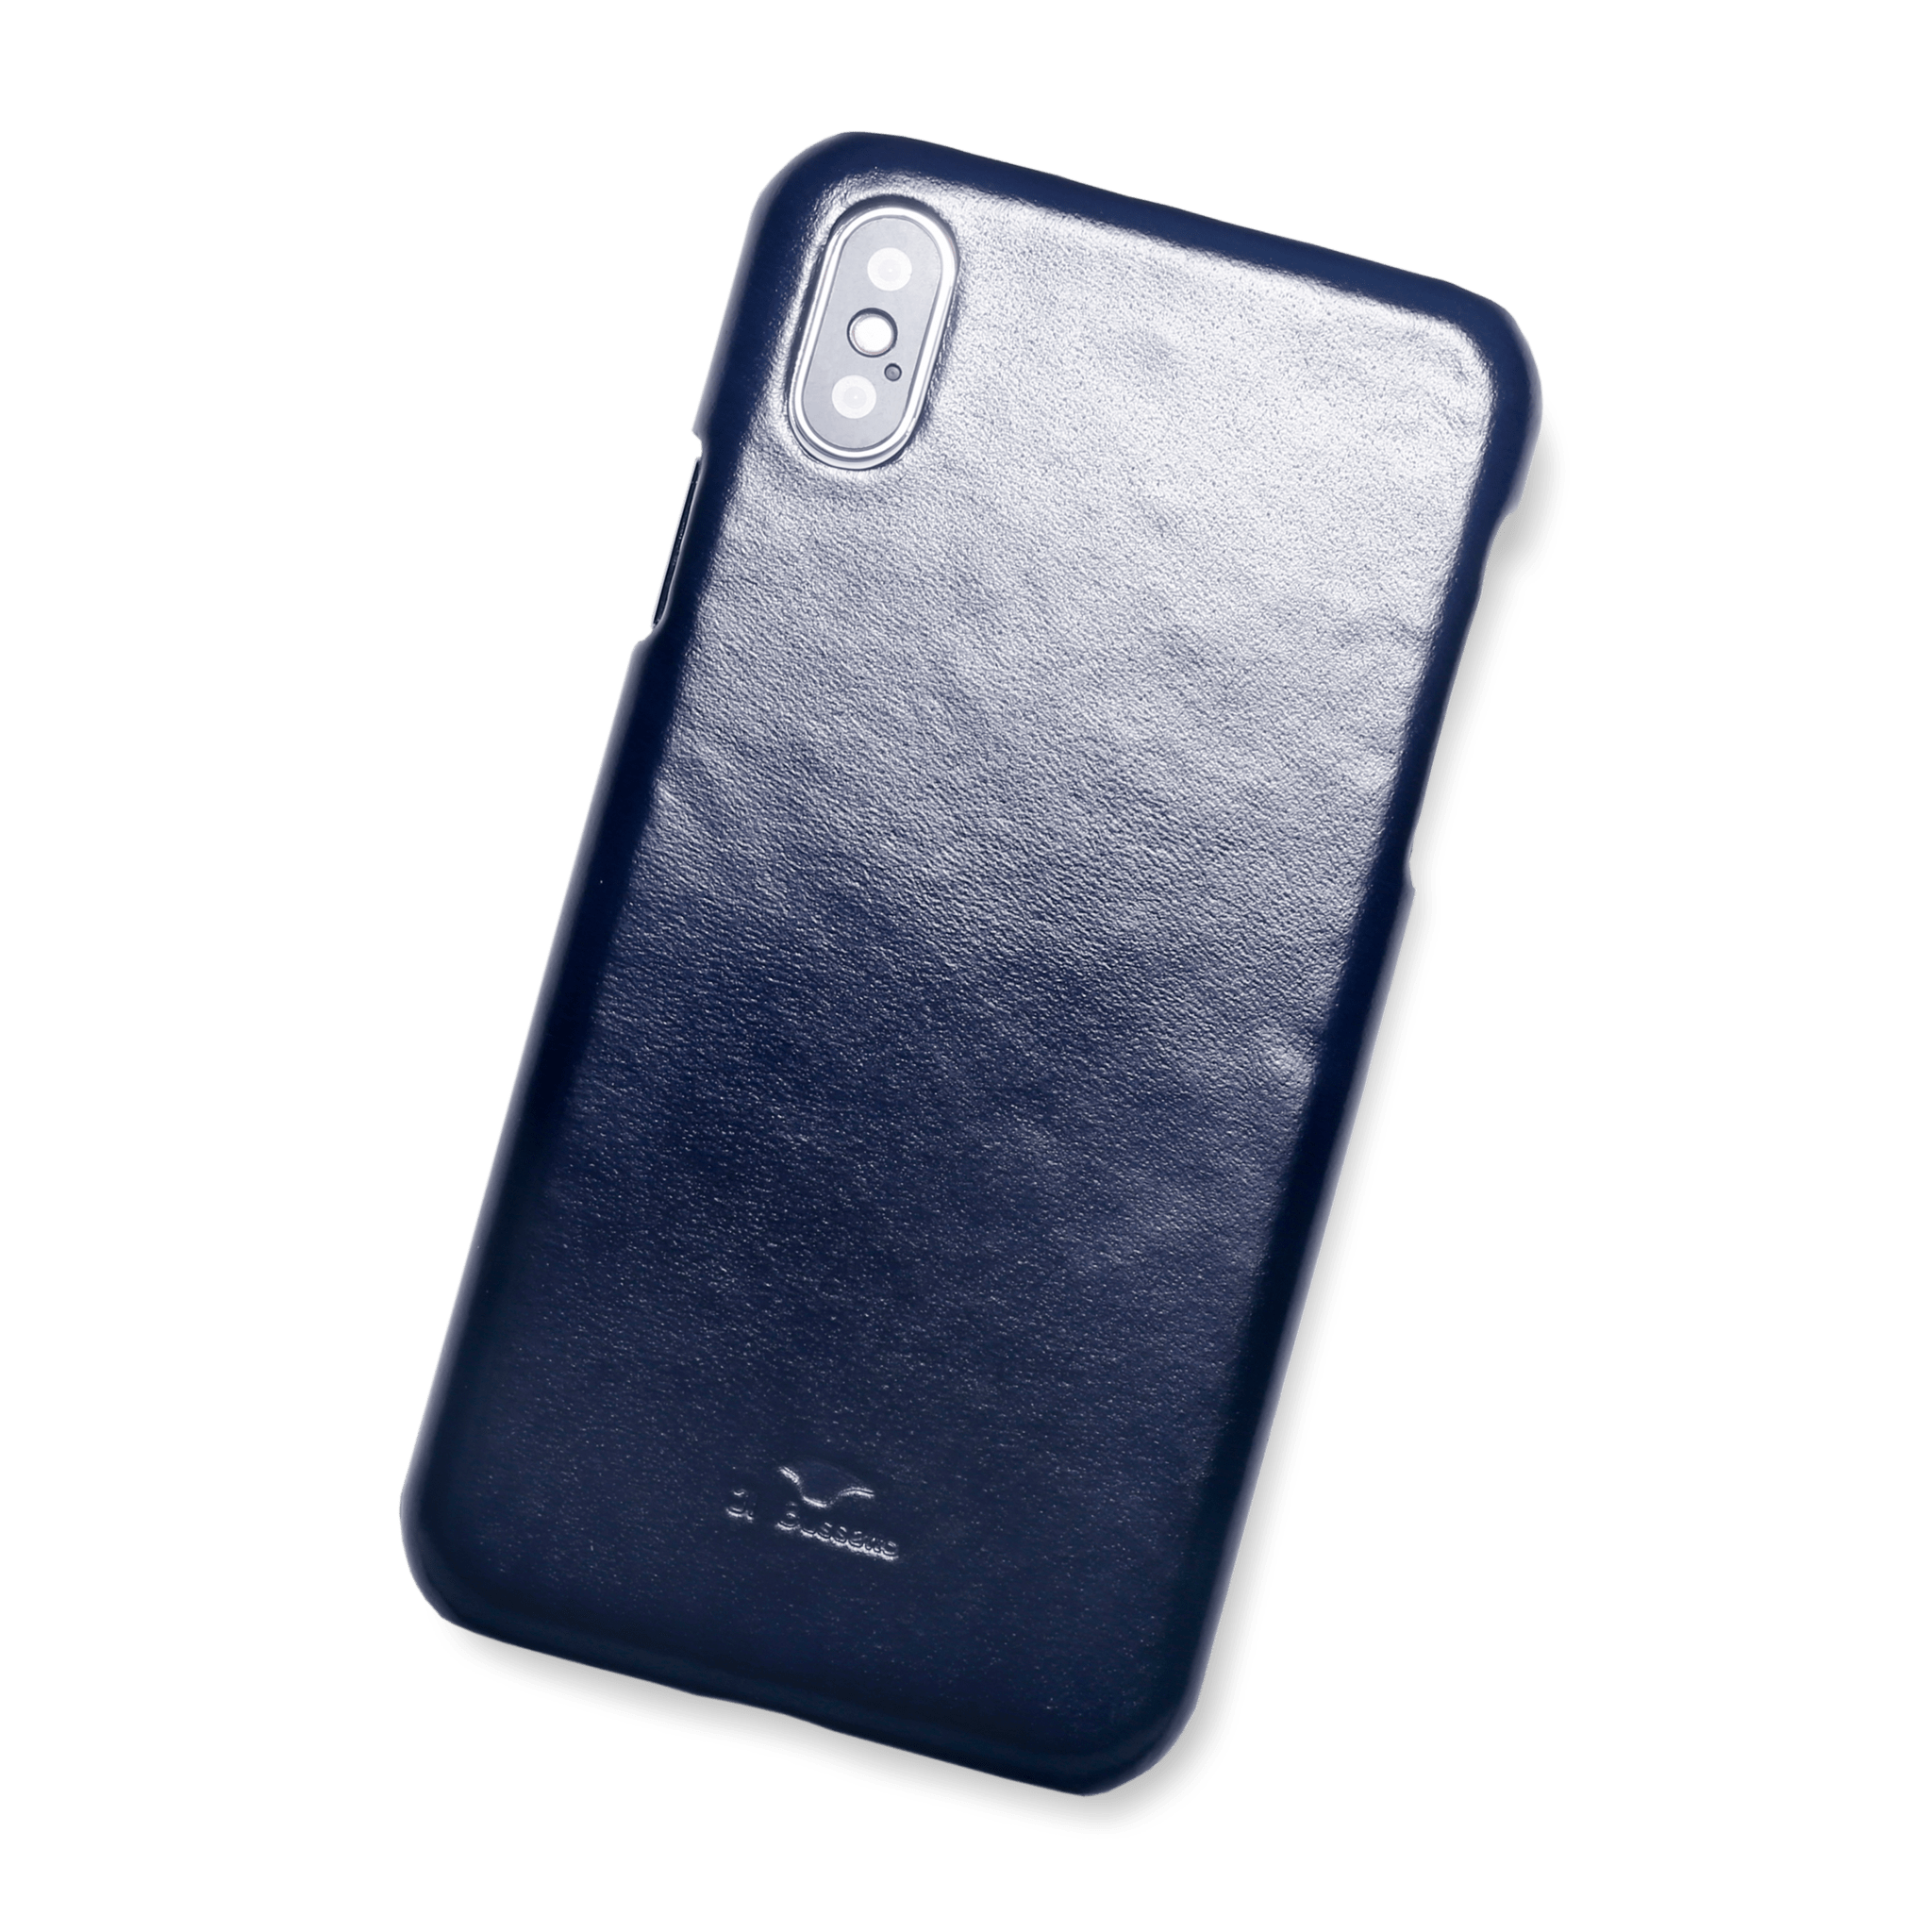 Leather iPhone X and XS Case